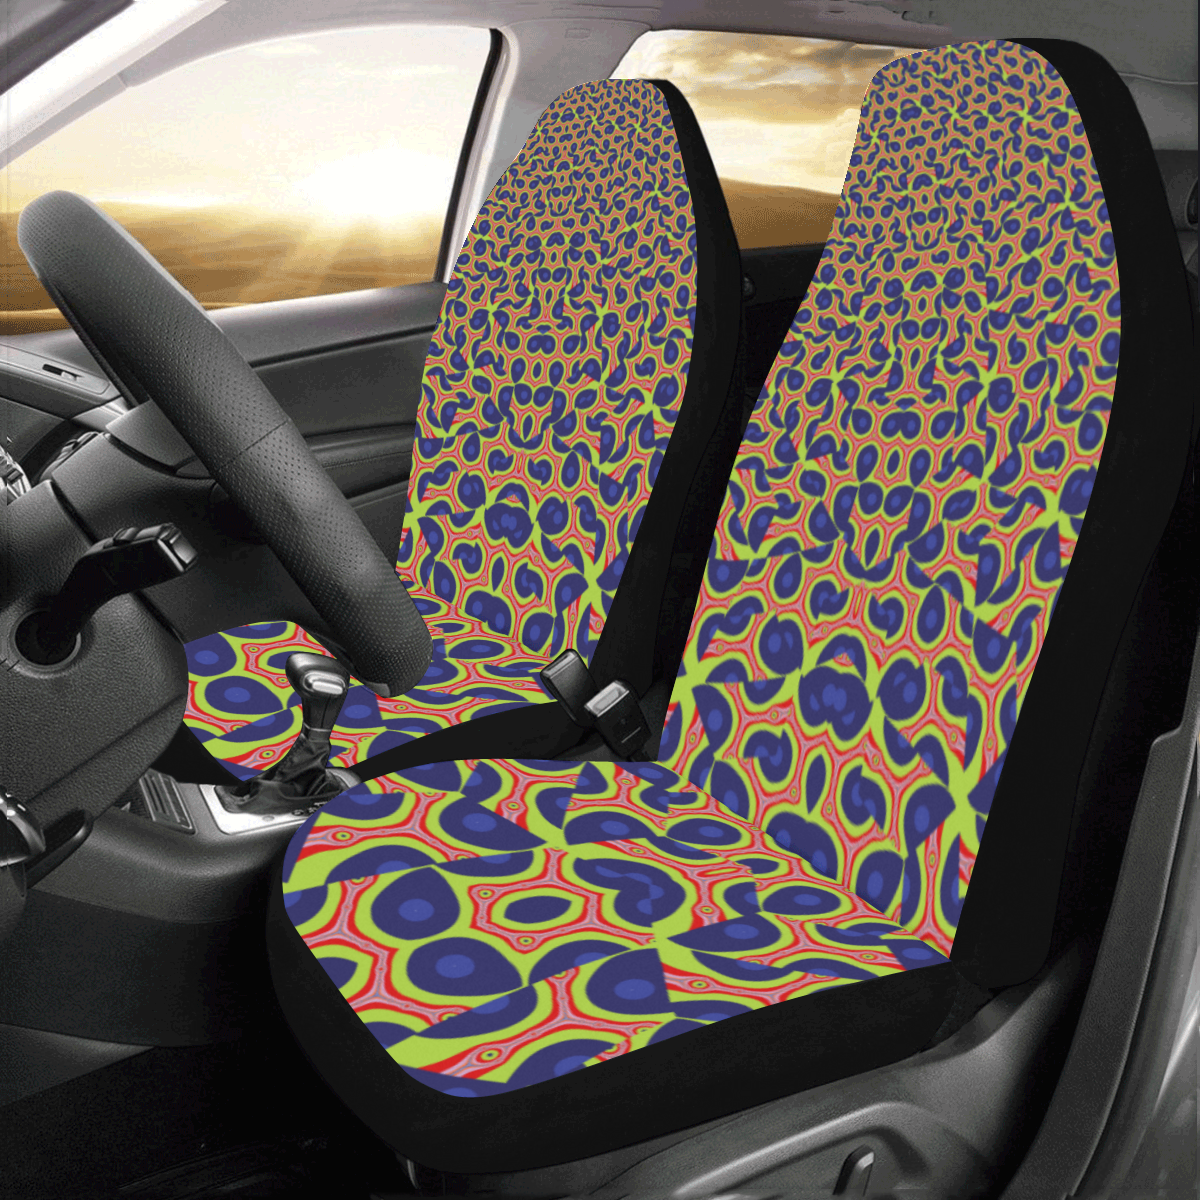 Patches Camouflage Pattern Car Seat Covers (Set of 2)